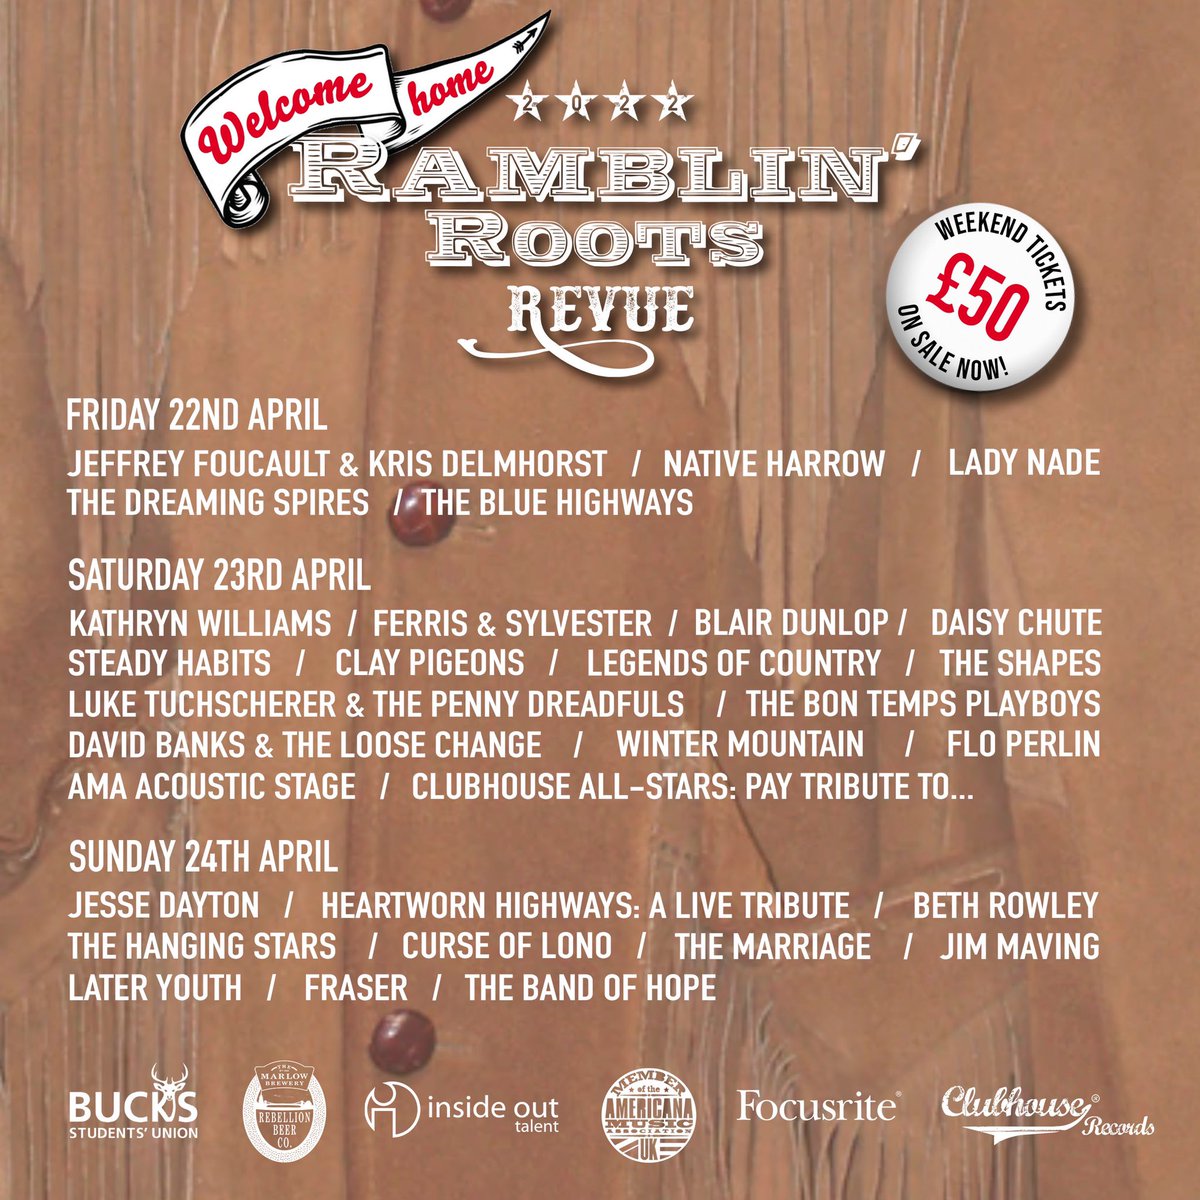 A little over 3 weeks until we welcome you back through our doors, we’ve missed you! Have you got your tickets yet? 🎫 : bit.ly/3B7ckFM FULL Weekend £50 Friday £20 Sat £25 Sun £20 #RRR2022